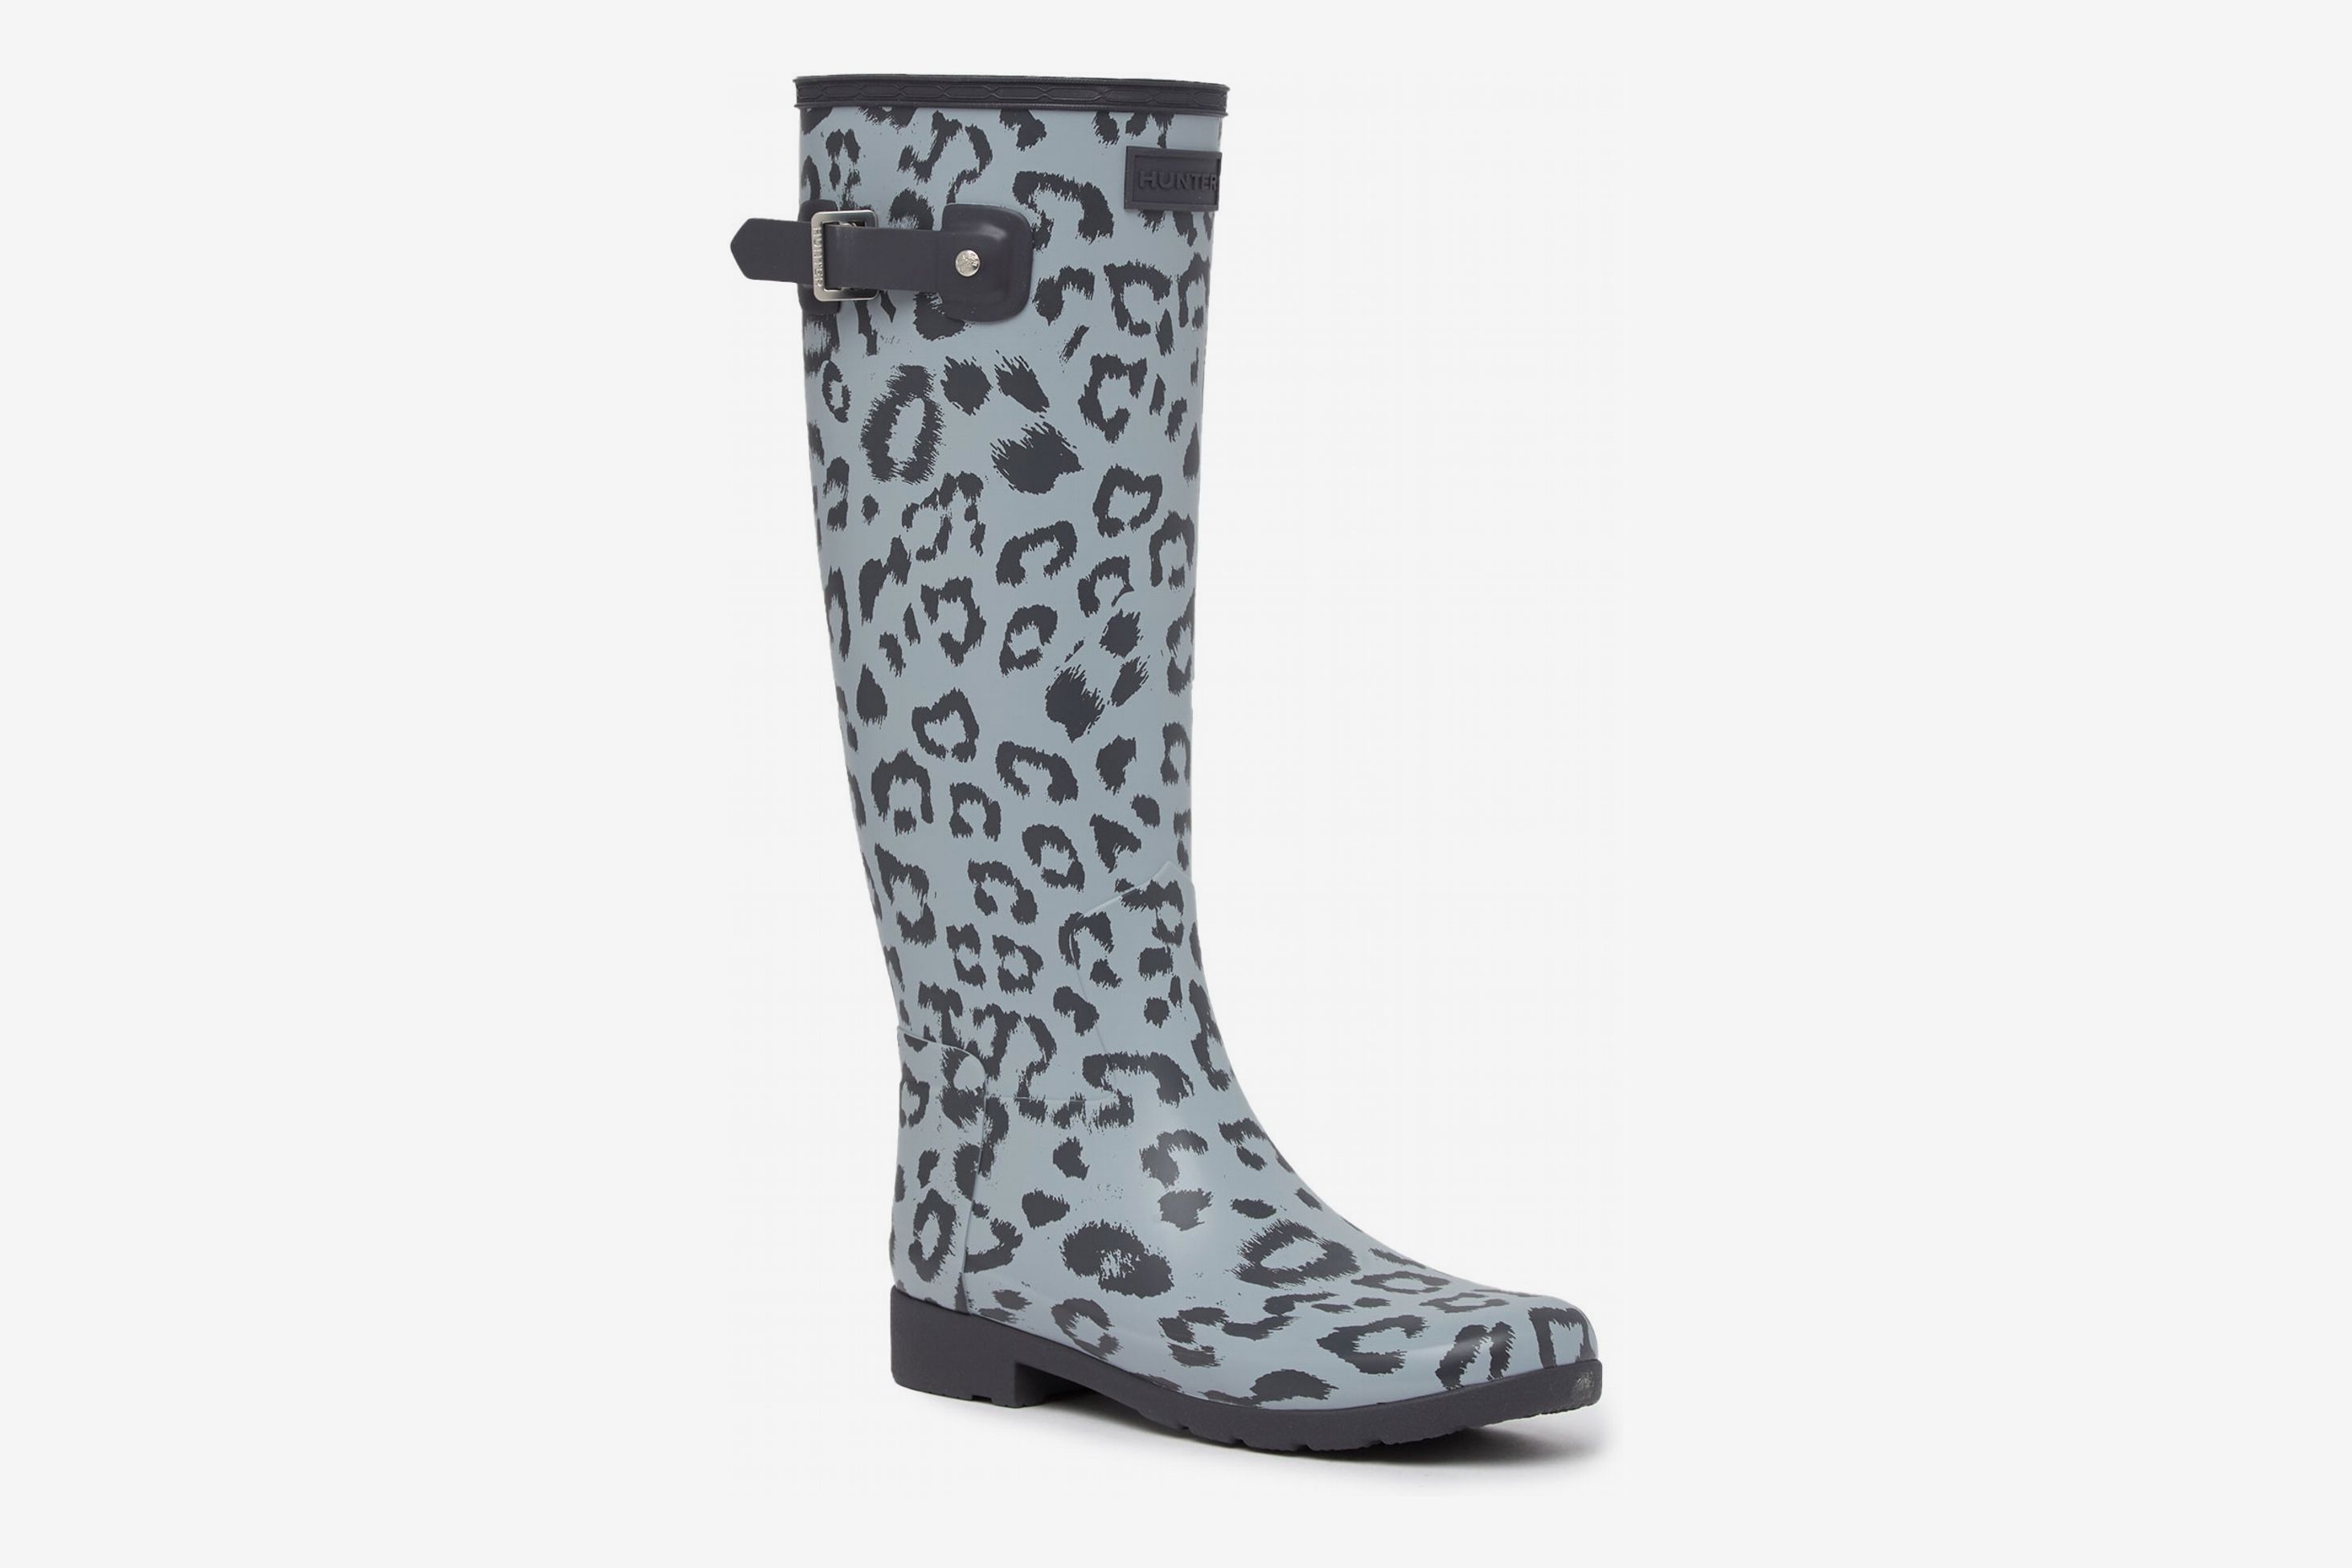 Nordstrom Rack Hunter Boots Outlet, 56% OFF | www.ingeniovirtual.com